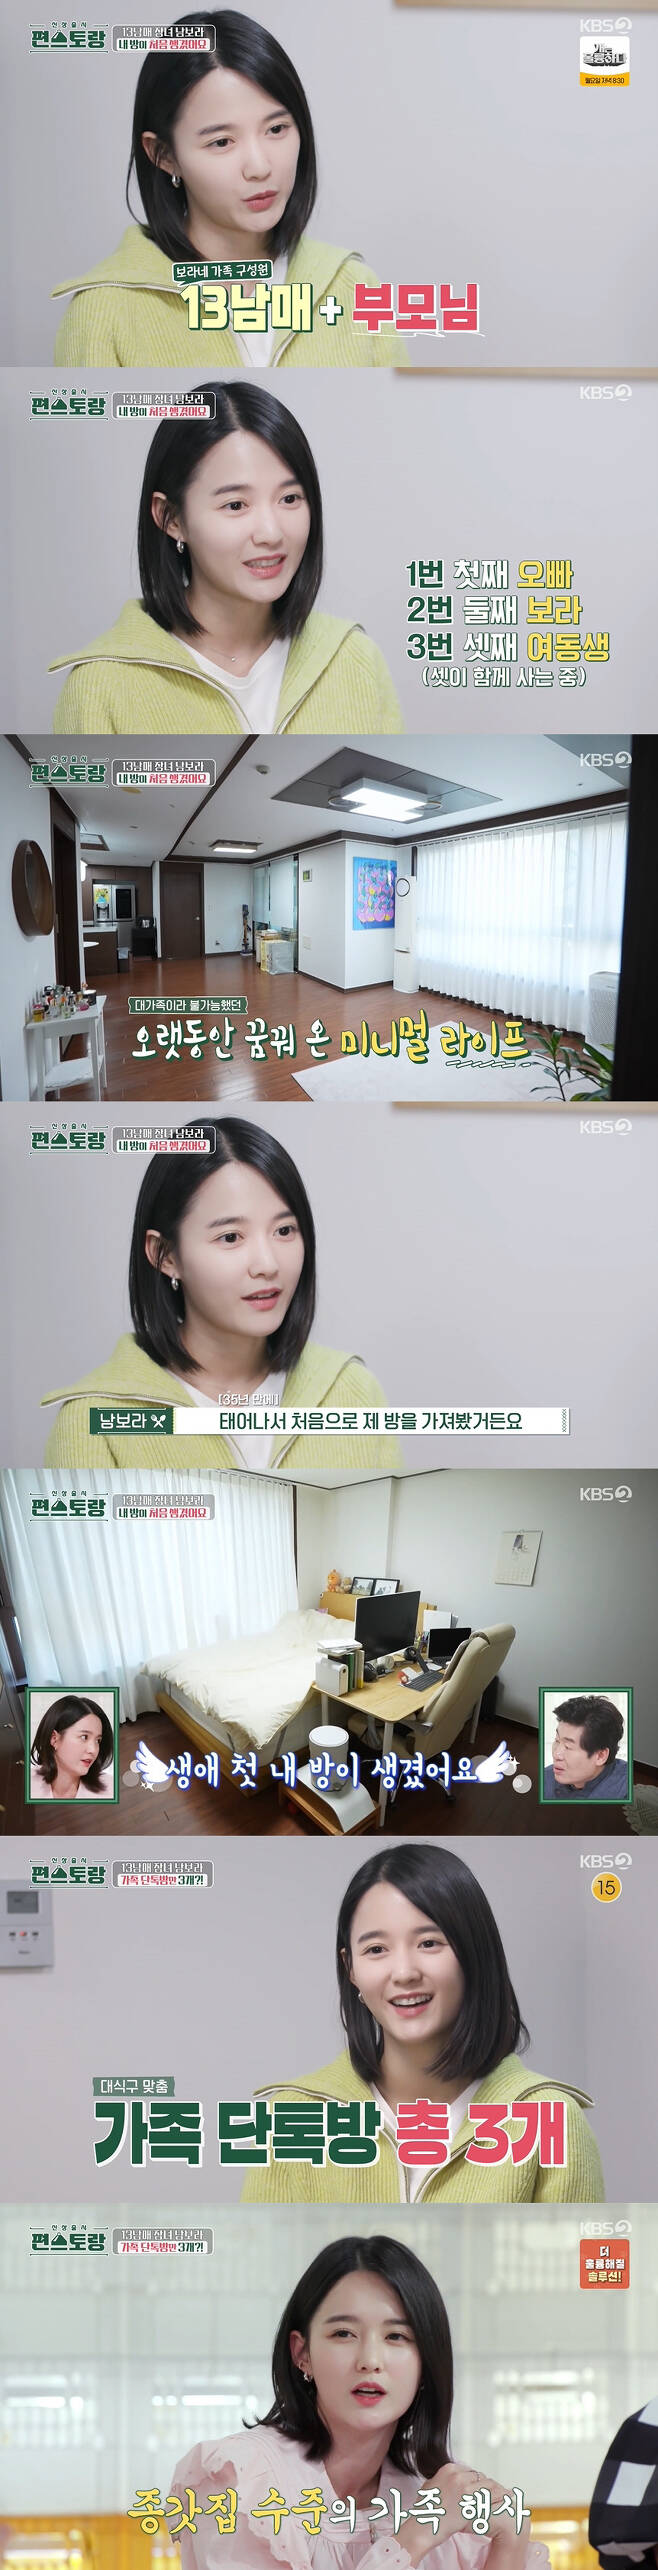 13Brother and Sister Extended familys K-the eldest daughter Nam Bo-ra boasted that he had an inner room for the first time in 35 years.Nam Bo-ra first appeared on KBS 2TV Stars Top Recipe at Fun-Staurant on the 7th.Nam Bo-ras house, which was moved a month ago, attracted attention with its somewhat dreary interior without a TV and sofa in the living room.Nam Bo-ra said, My previous house had a full living room. I felt like I owned a full house, but I was too tired. So I wanted to leave the living room as a resting place. I didnt buy a couch or put on a TV on purpose. At home, I dont have anything to rest unconditionally.Nam Bo-ra, who lives with her first brother, third brother and three Korean independence movements, said, I moved to this house and took my room for the first time in my life. It was so good.I wanted to place it with warm-toned furniture, and I bought my bedding for the first time, he said.On the other hand, Nam Bo-ra had a Korean independence movement in his home town, but he was busy communicating with his family from the morning.There are 14 people in Dont bother because the families are all in, he said. There are three Family Dont bothers, including the whole Family room, the sisters room, and the residents room.It is also busy to send messages. Once you open it, there are times when 100 to 200 messages are stacked. Nam Bo-ra is an extended family, so its hard to get Family Event. I get birthdays and graduation ceremonies, but I do not get the entrance ceremony.I do not want to go to school on the same day, he said.